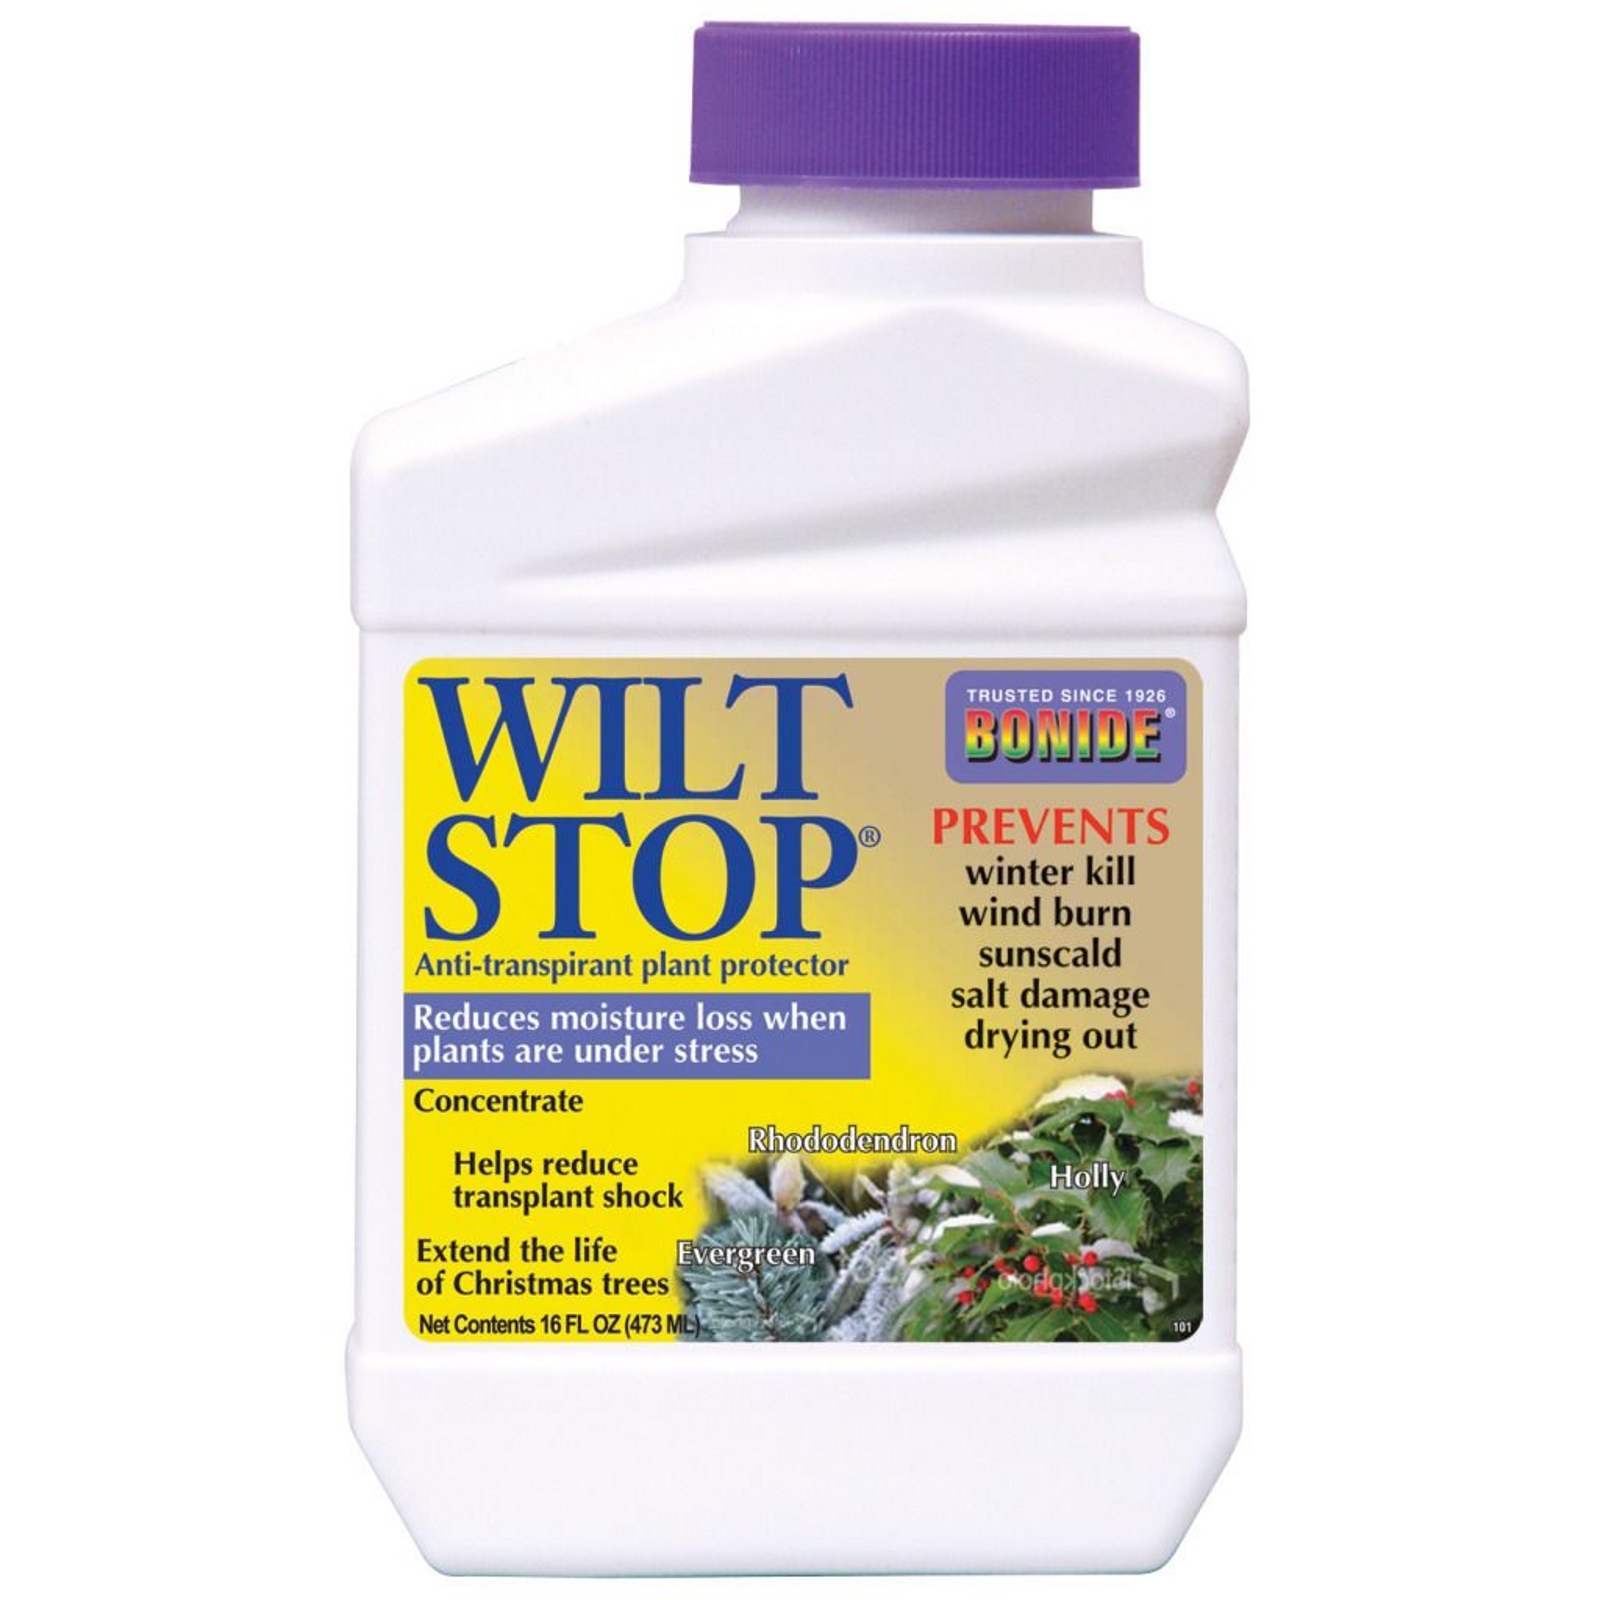 Bonide BND101 Wilt Stop Plant Protector Concentrate - 1 pint